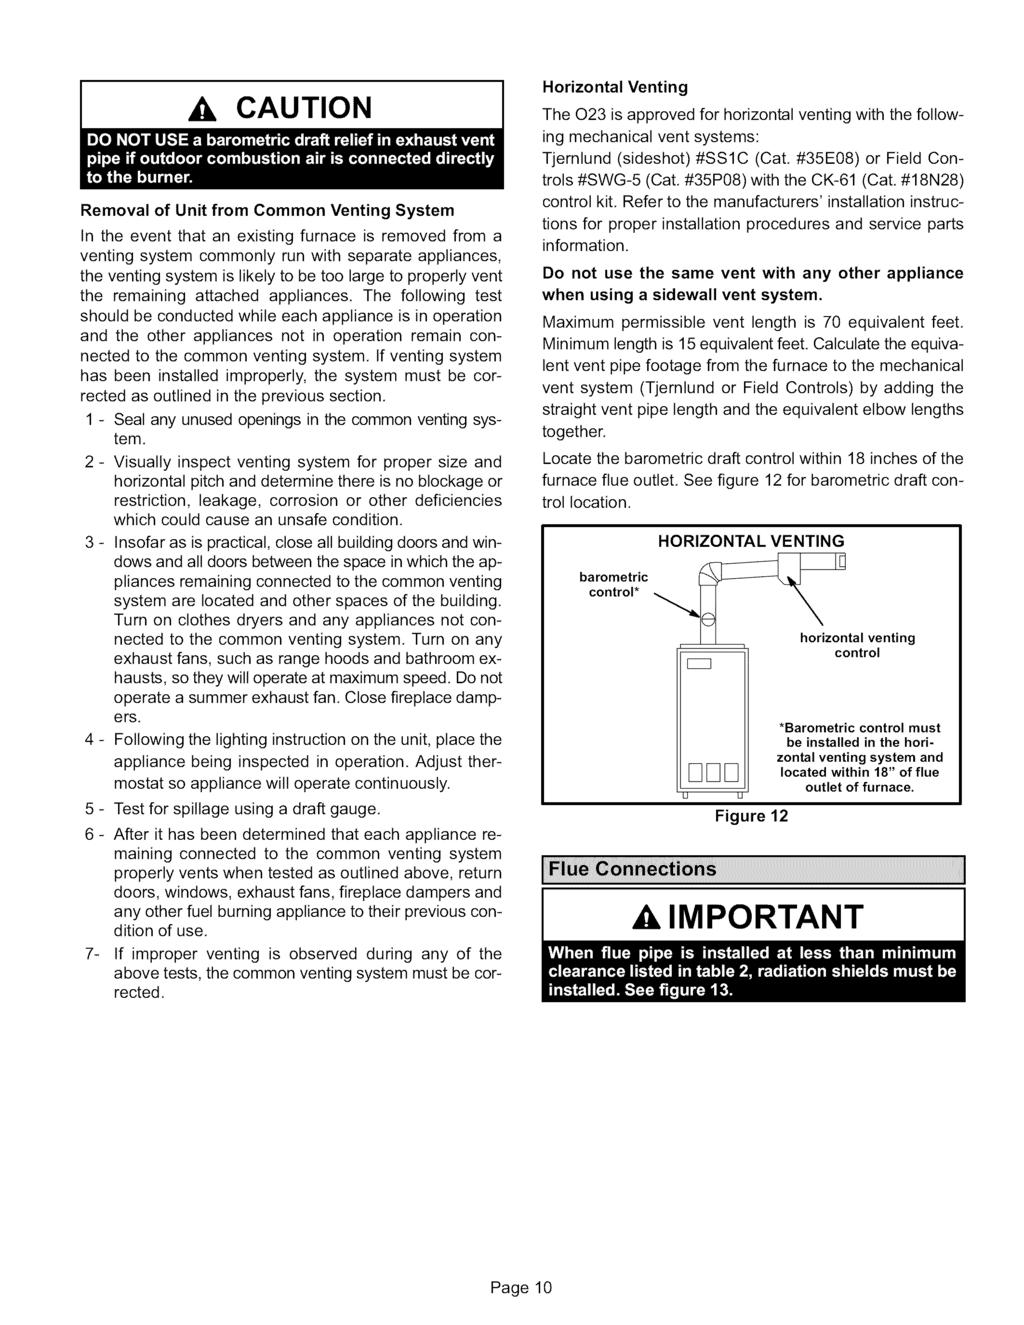 CAUTION Removal of Unit from Common Venting System In the event that an existing furnace is removed from a venting system commonly run with separate appliances, the venting system is likely to be too